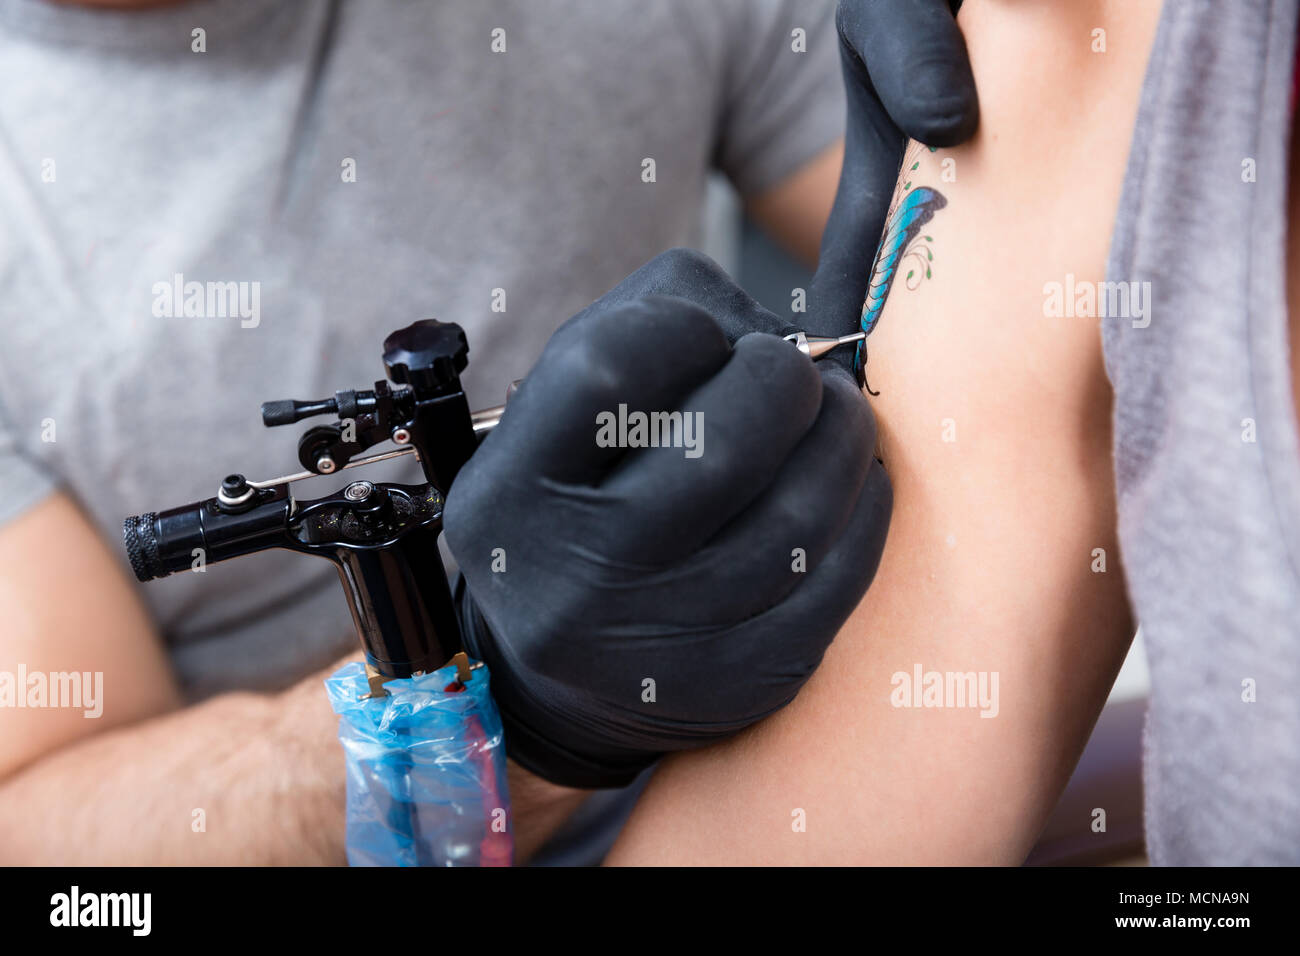 Hands of a cautious artist wrapping with dry plastic a new colorful tattoo Stock Photo